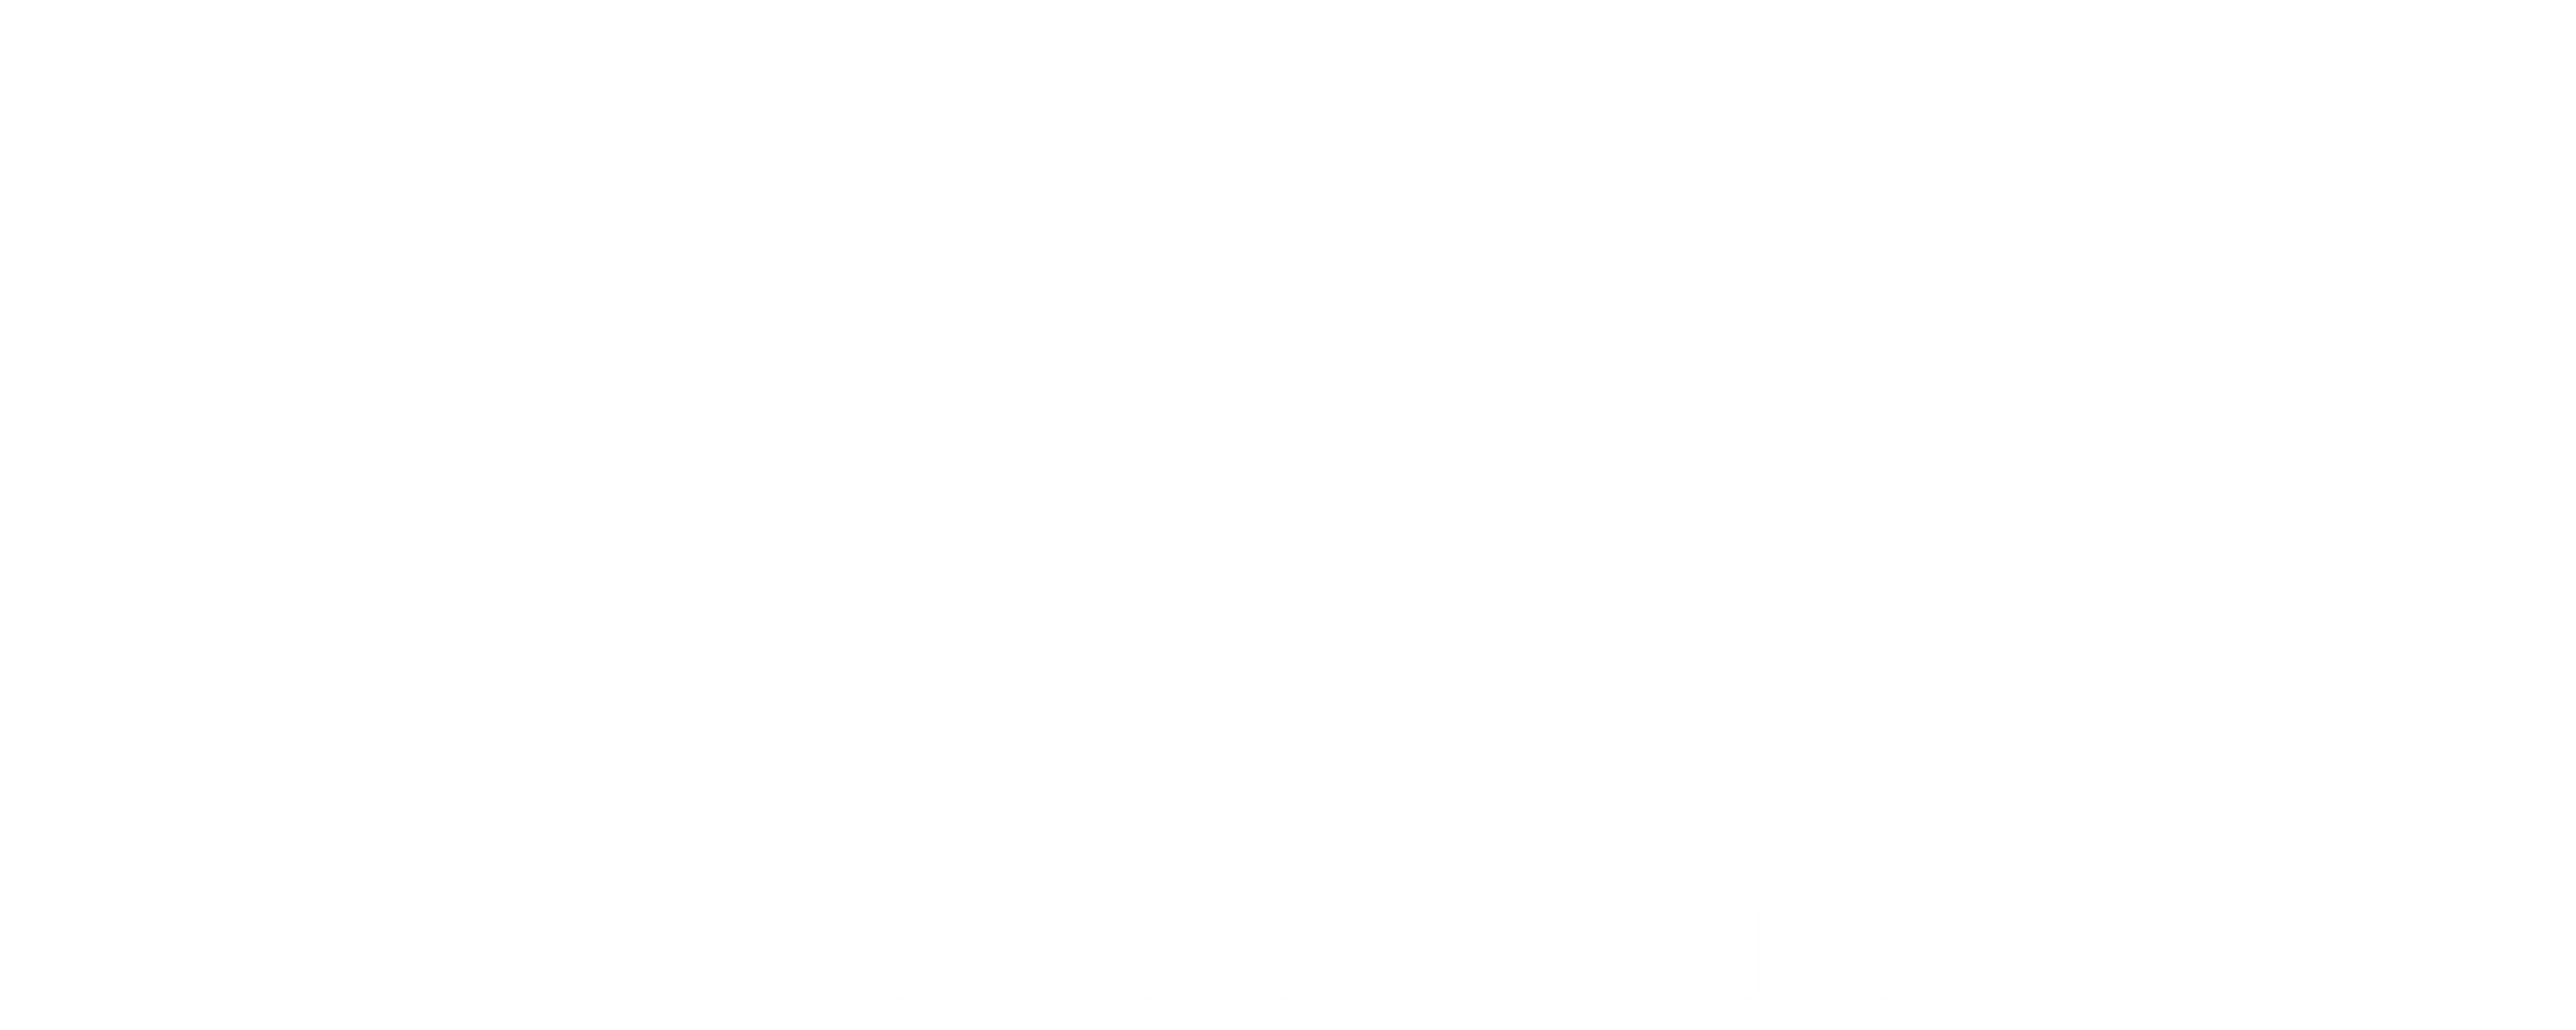 The Marriott logo in white, on a transparent background.